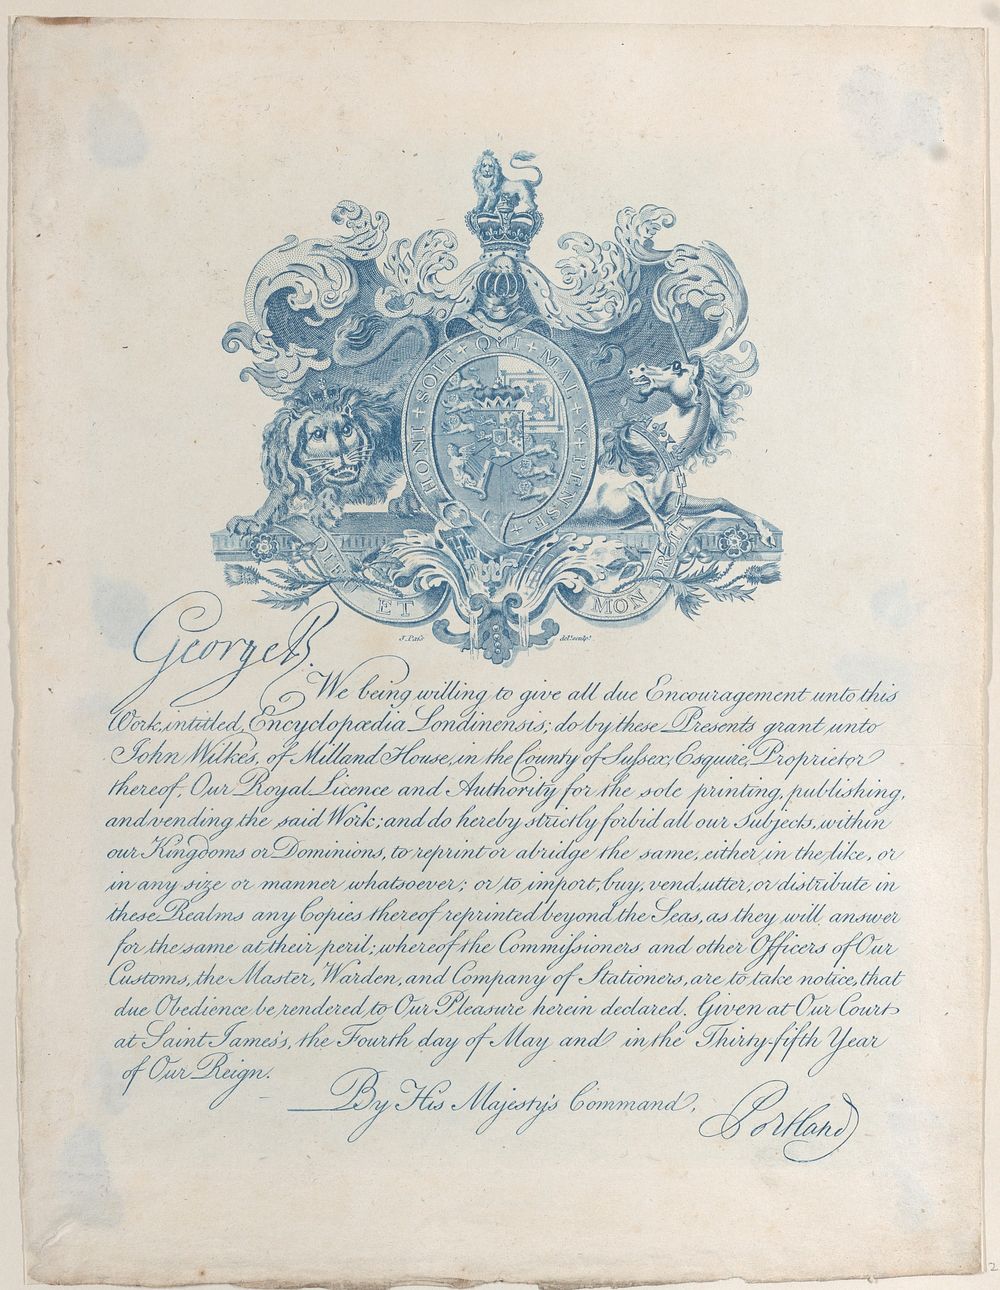 Royal Lisence and Copyright for Encyclopaedia Londinesis